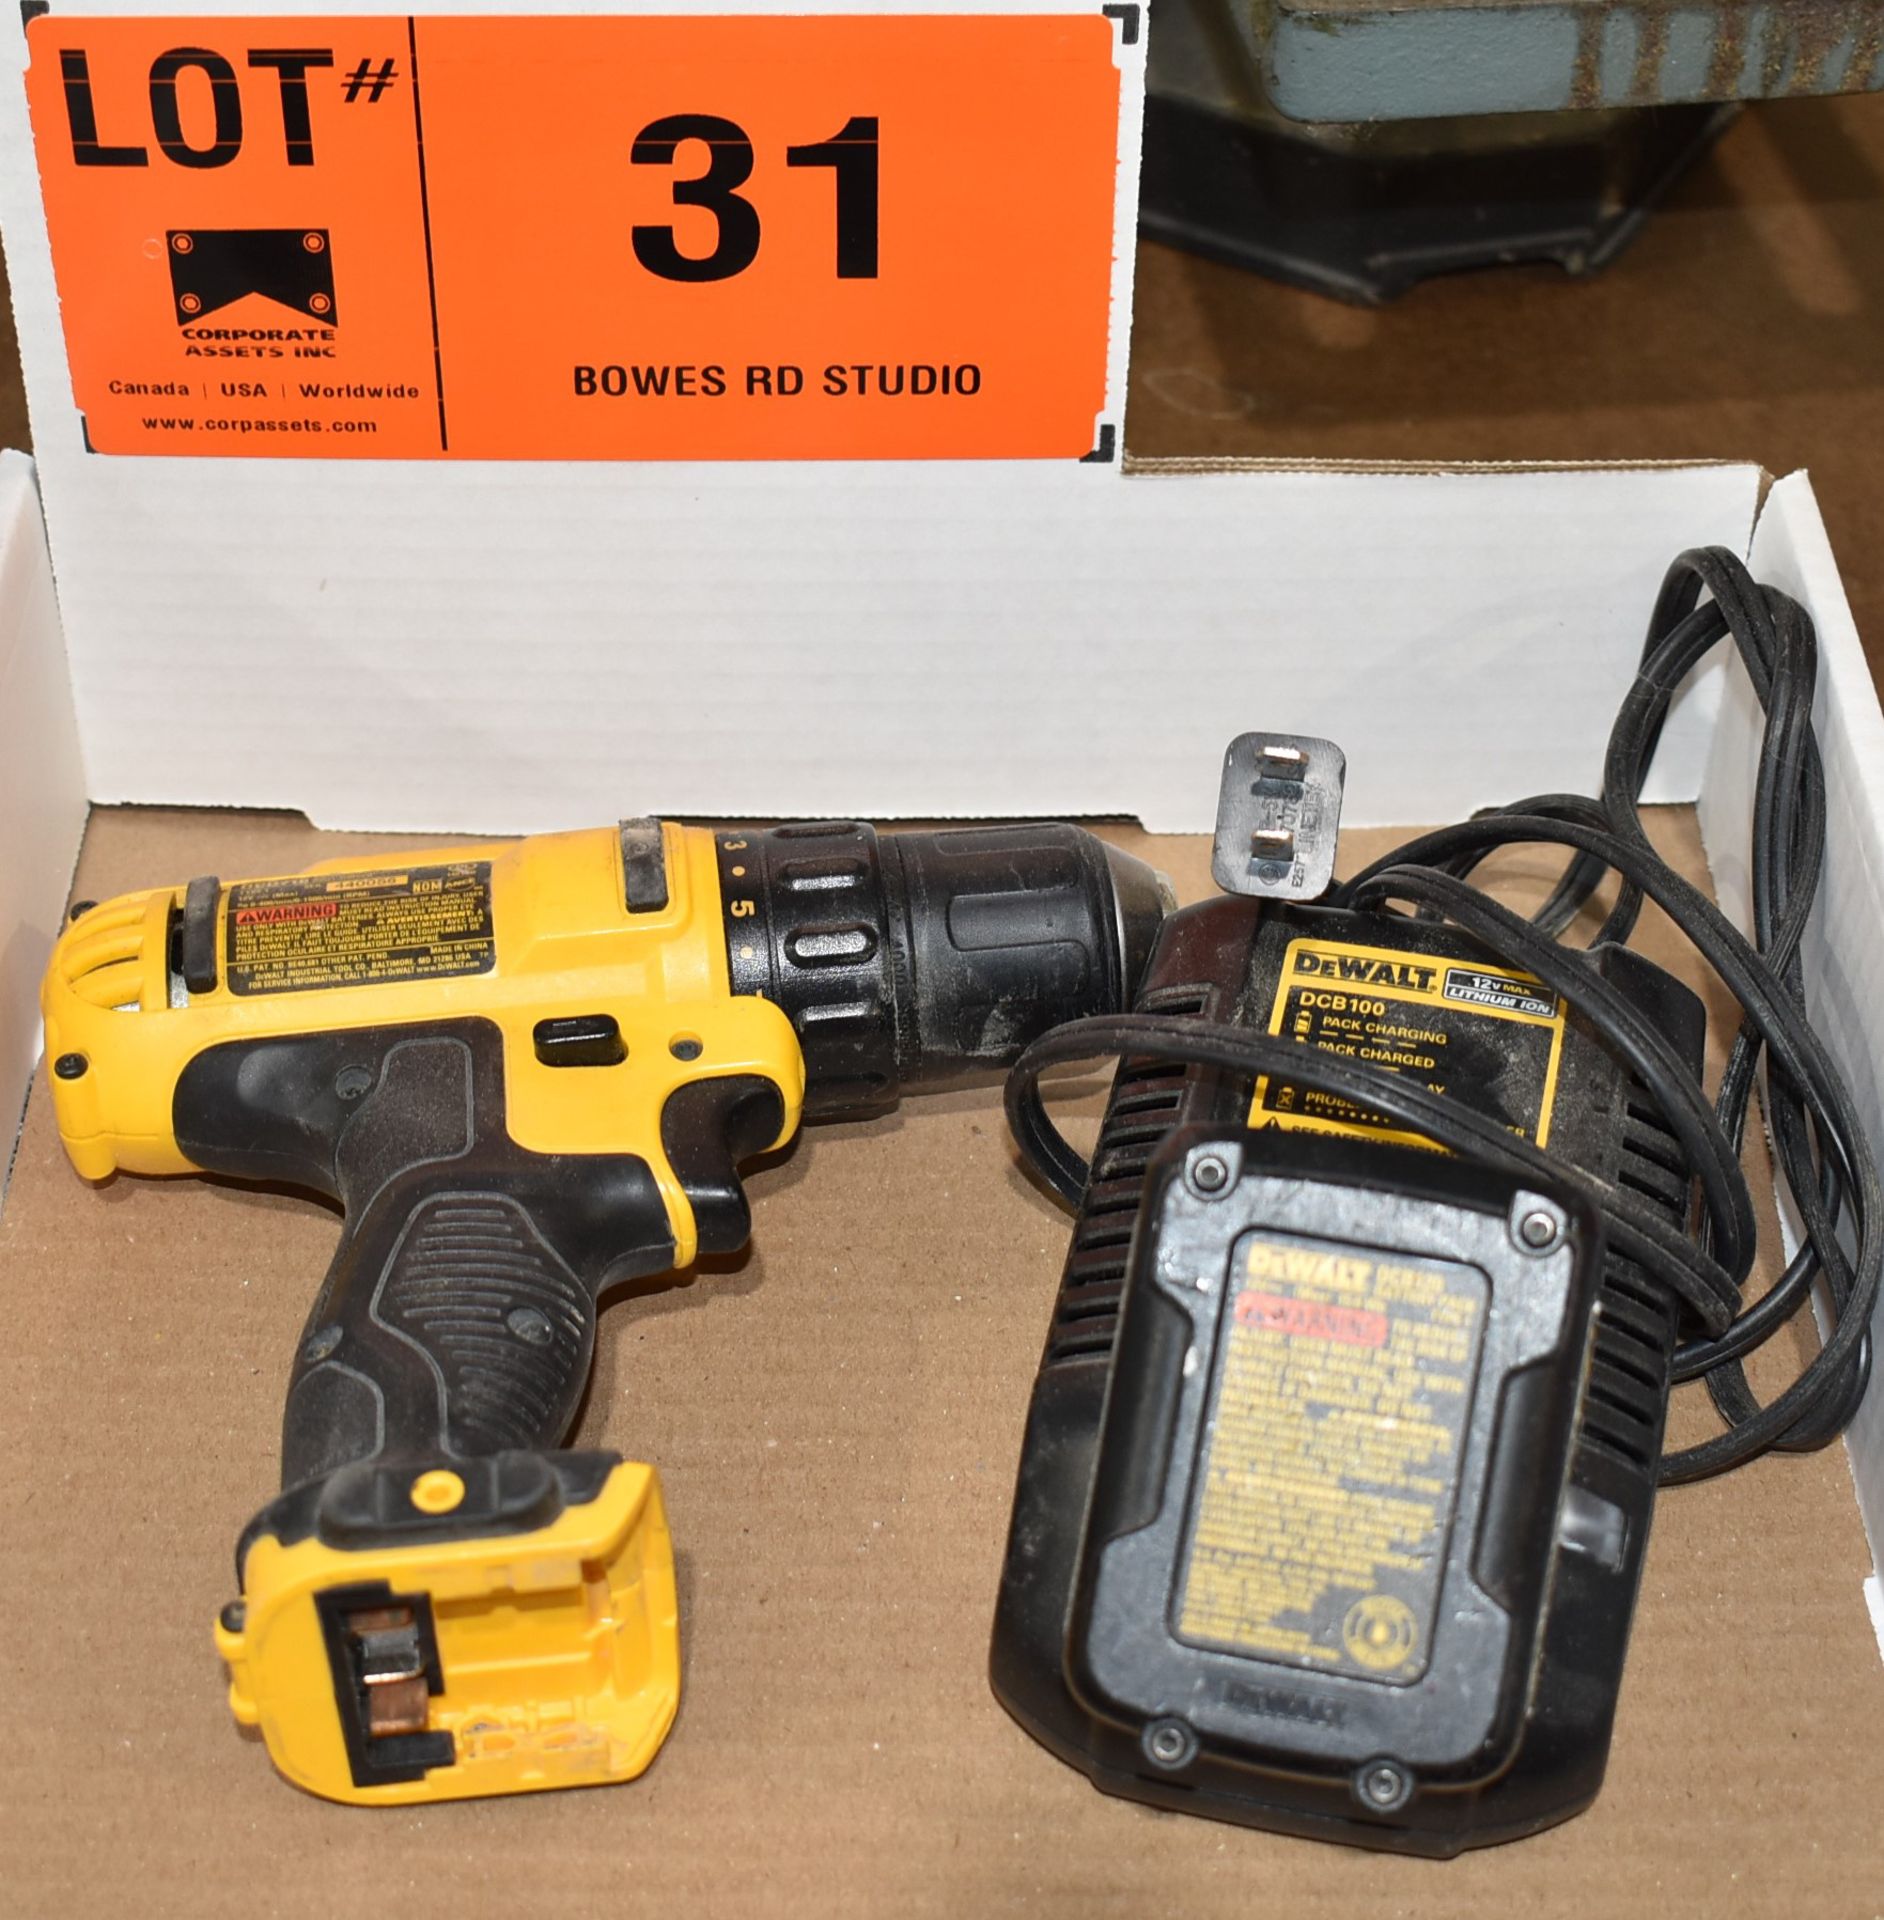 LOT/ DEWALT DCD710 3/8" CORDLESS DRILL WITH BATTERY & CHARGER